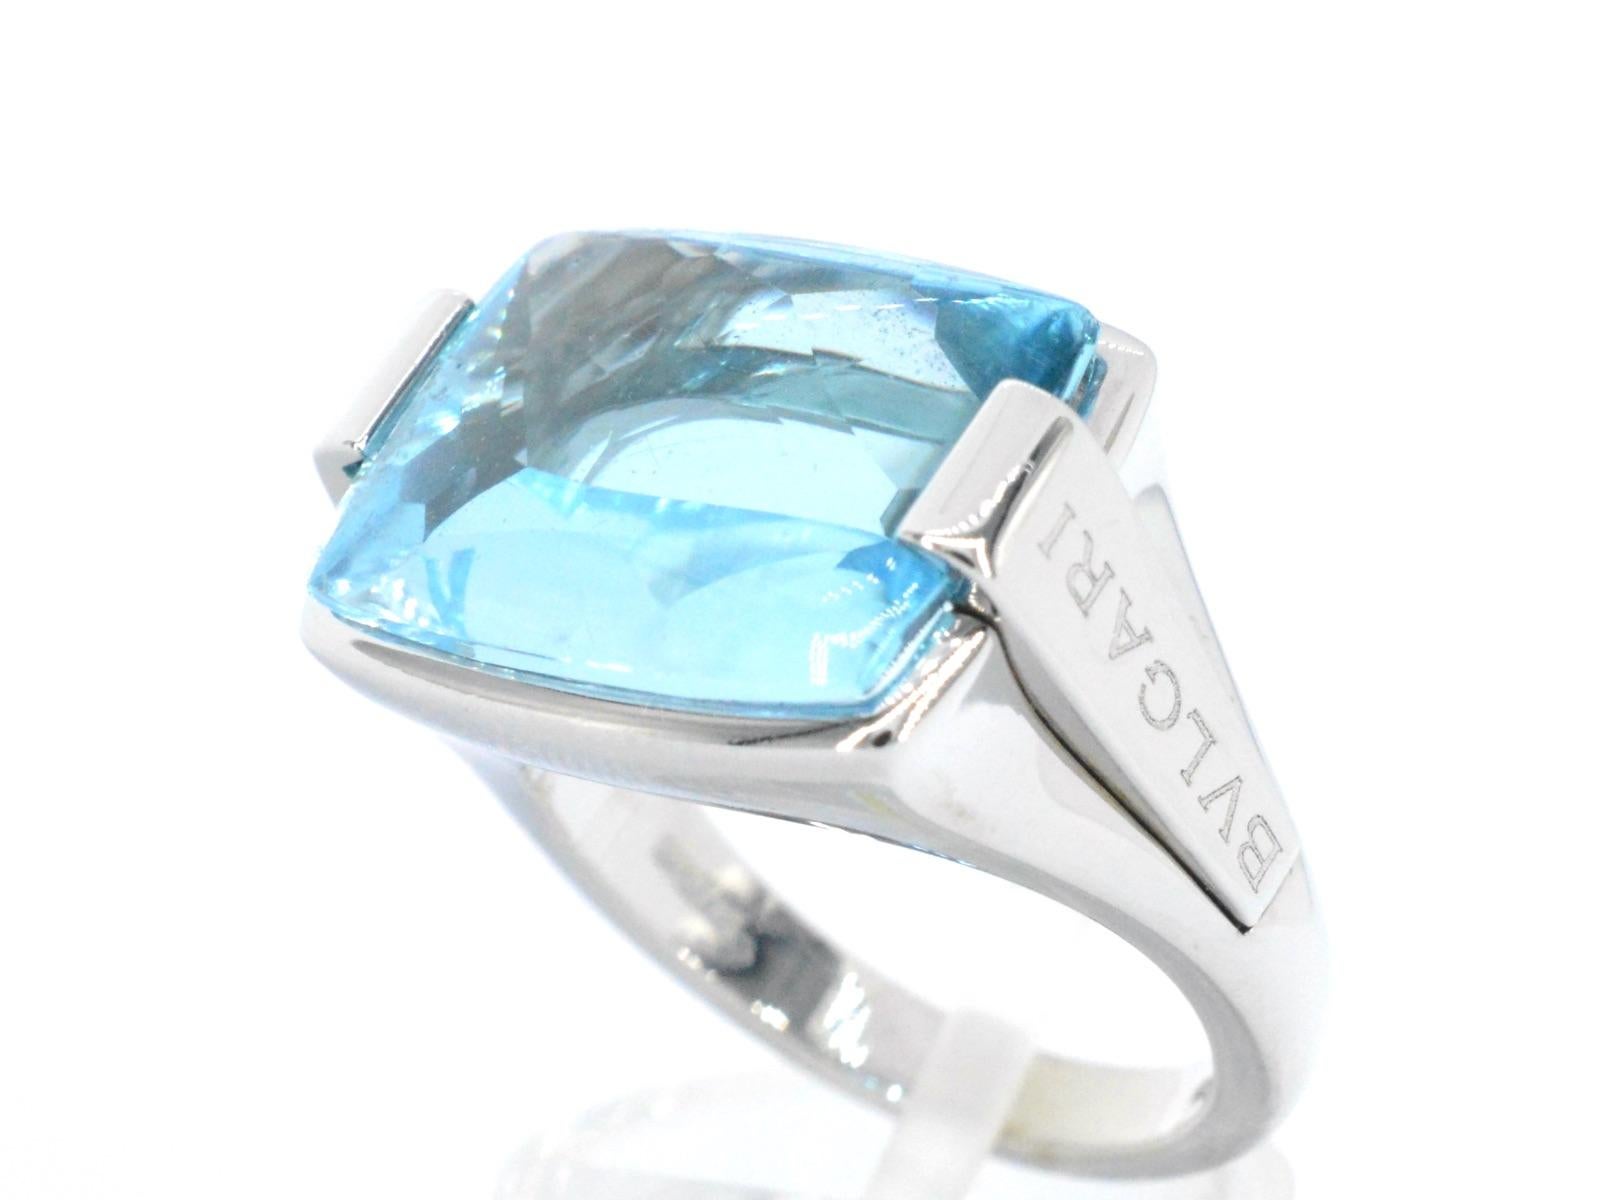 Cabochon Bvlgari Blue Topaz Cocktail Ring For Sale